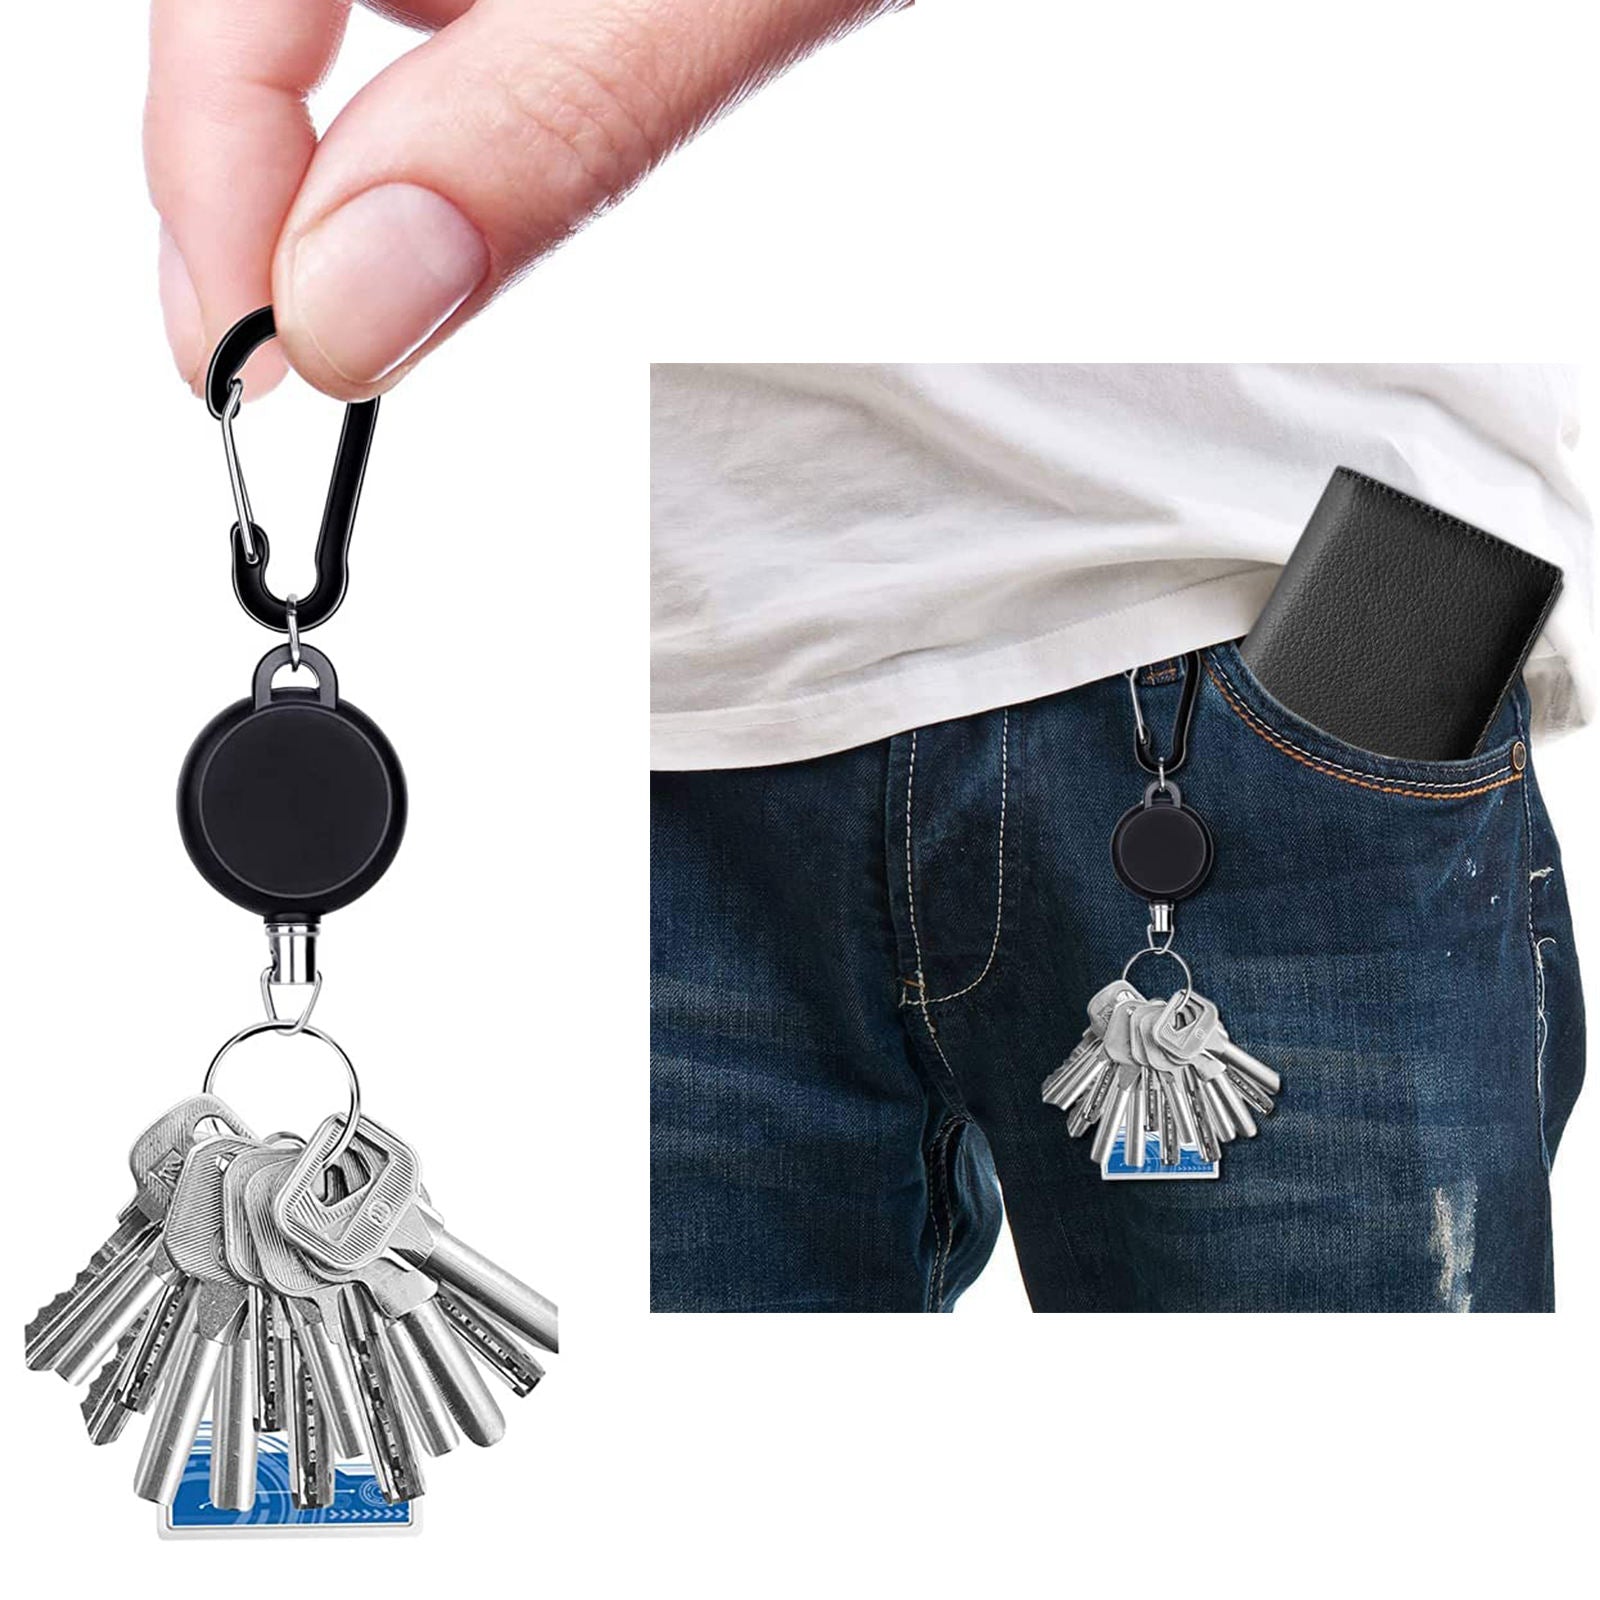 Pack of 5 Retractable Key Chain, Stretchable Key Holder with 60cm/ 23.6 Inches